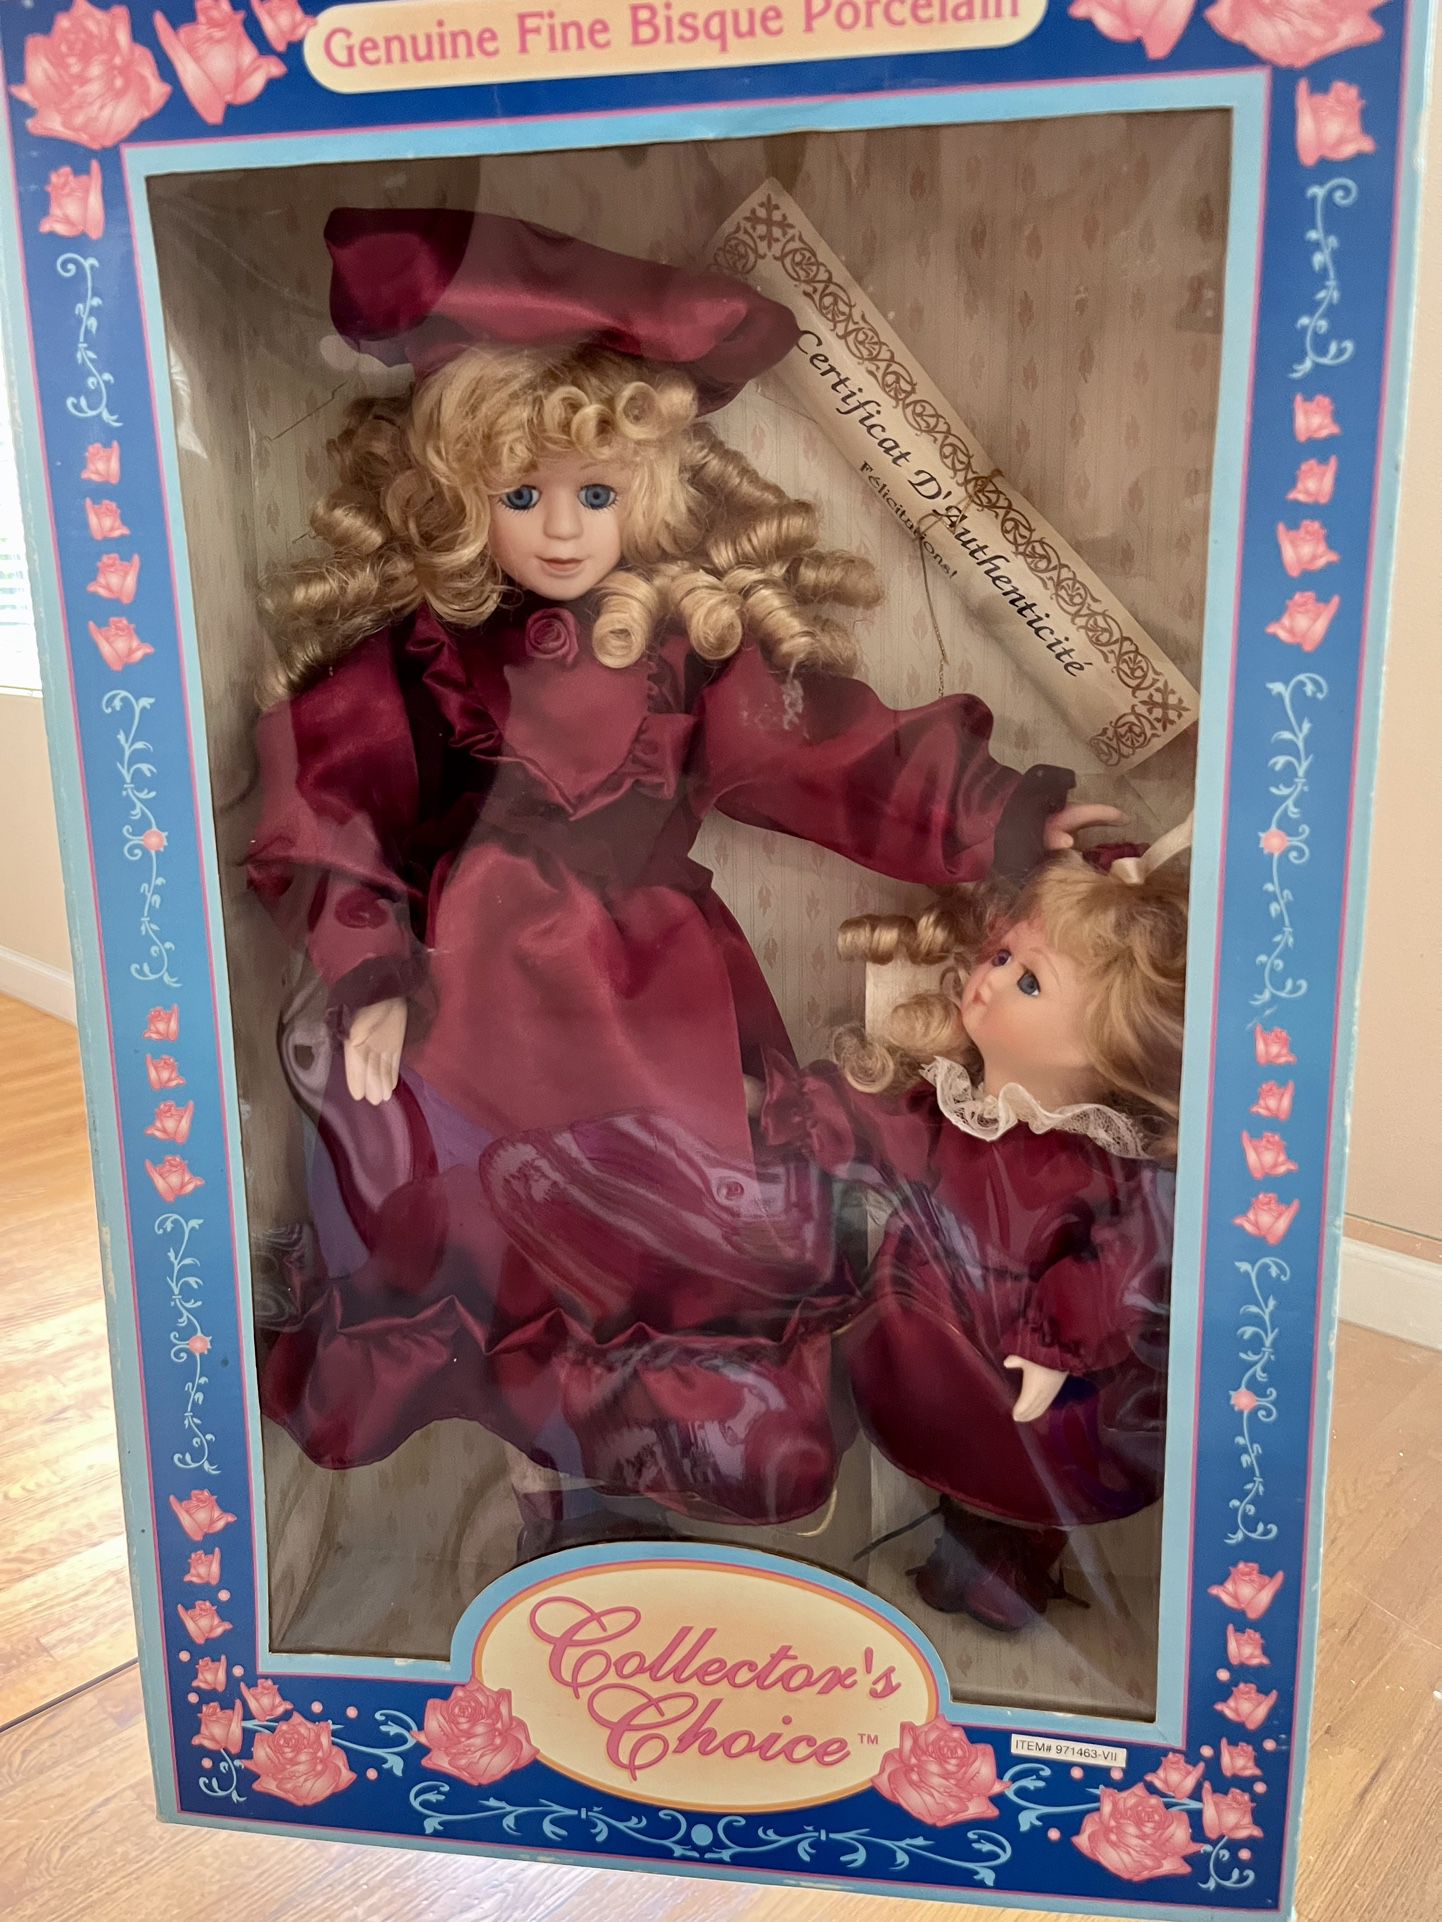 Collectors Choice Genuine Fine Bisque Porcelain Dolls Limited Edition With Certificate Of Authenticity 1.7 Feet Tall 